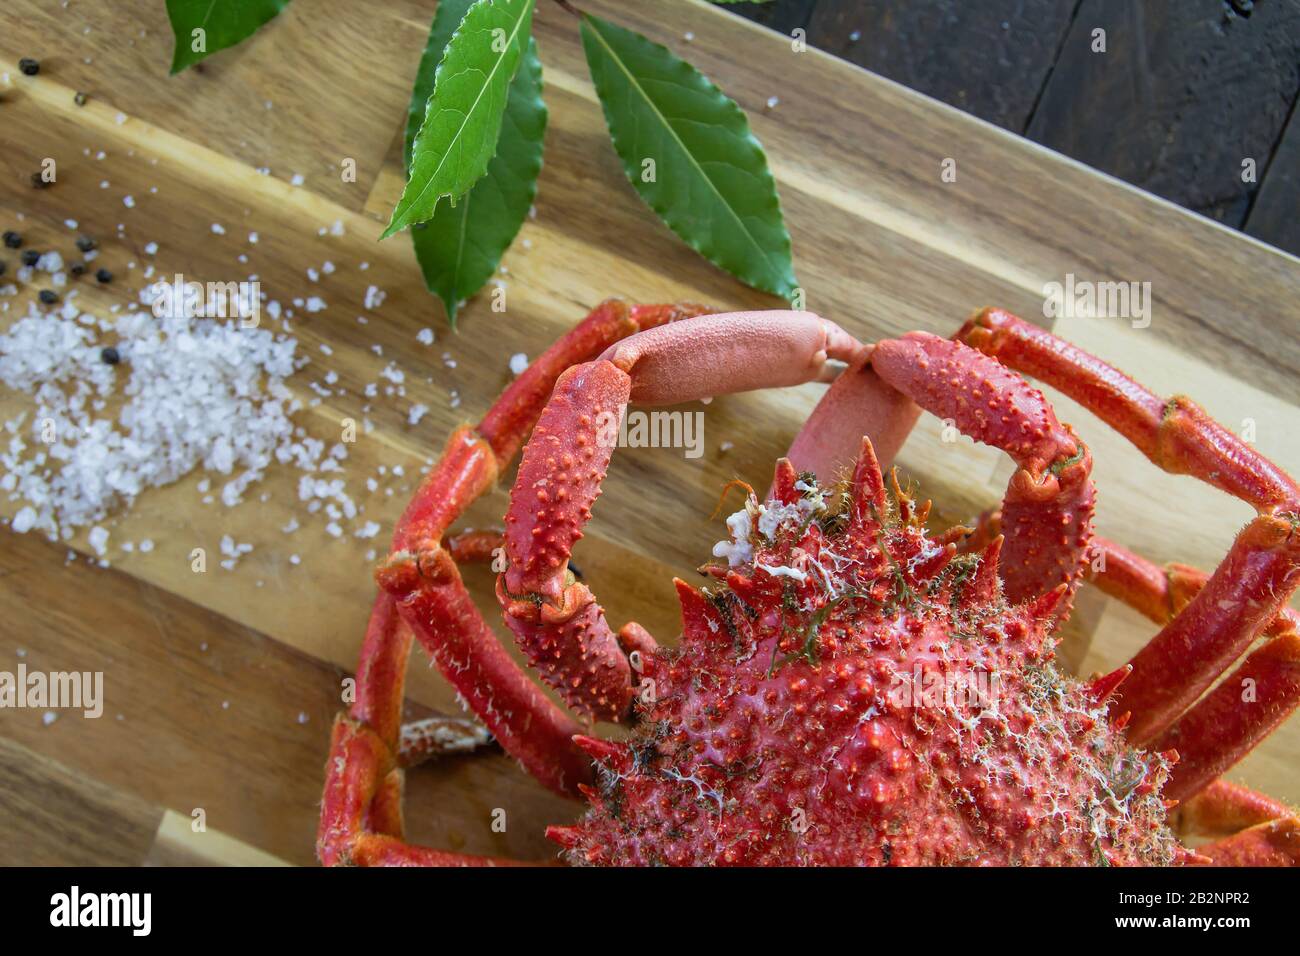 Red spiny spider crab, delicidous seafood preparation Stock Photo